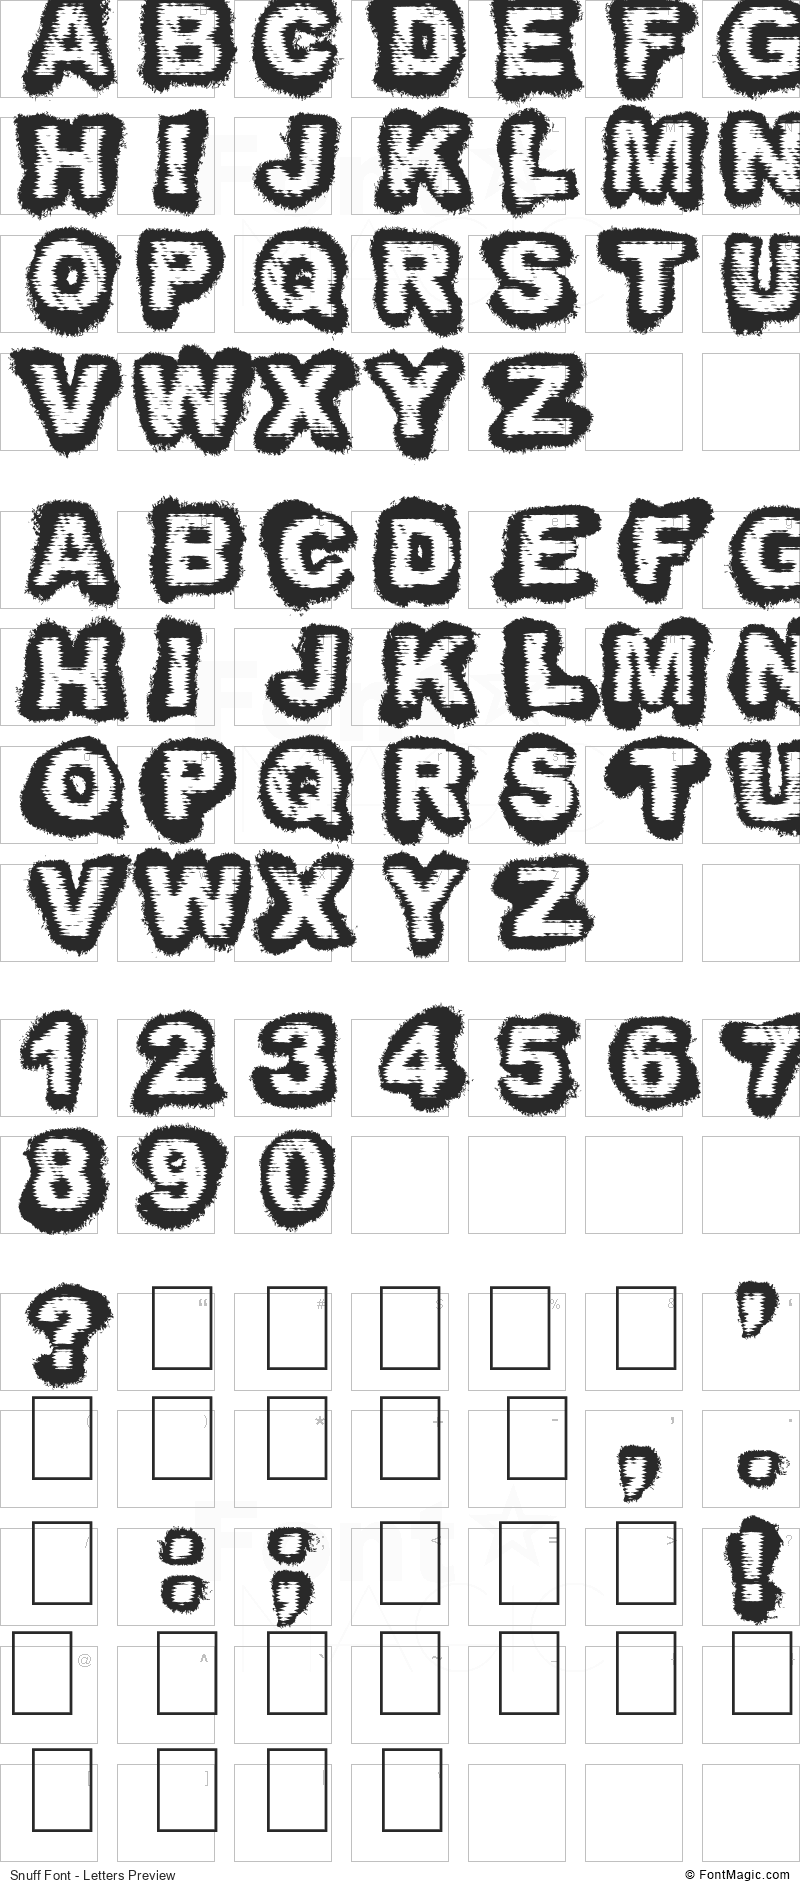 Snuff Font - All Latters Preview Chart